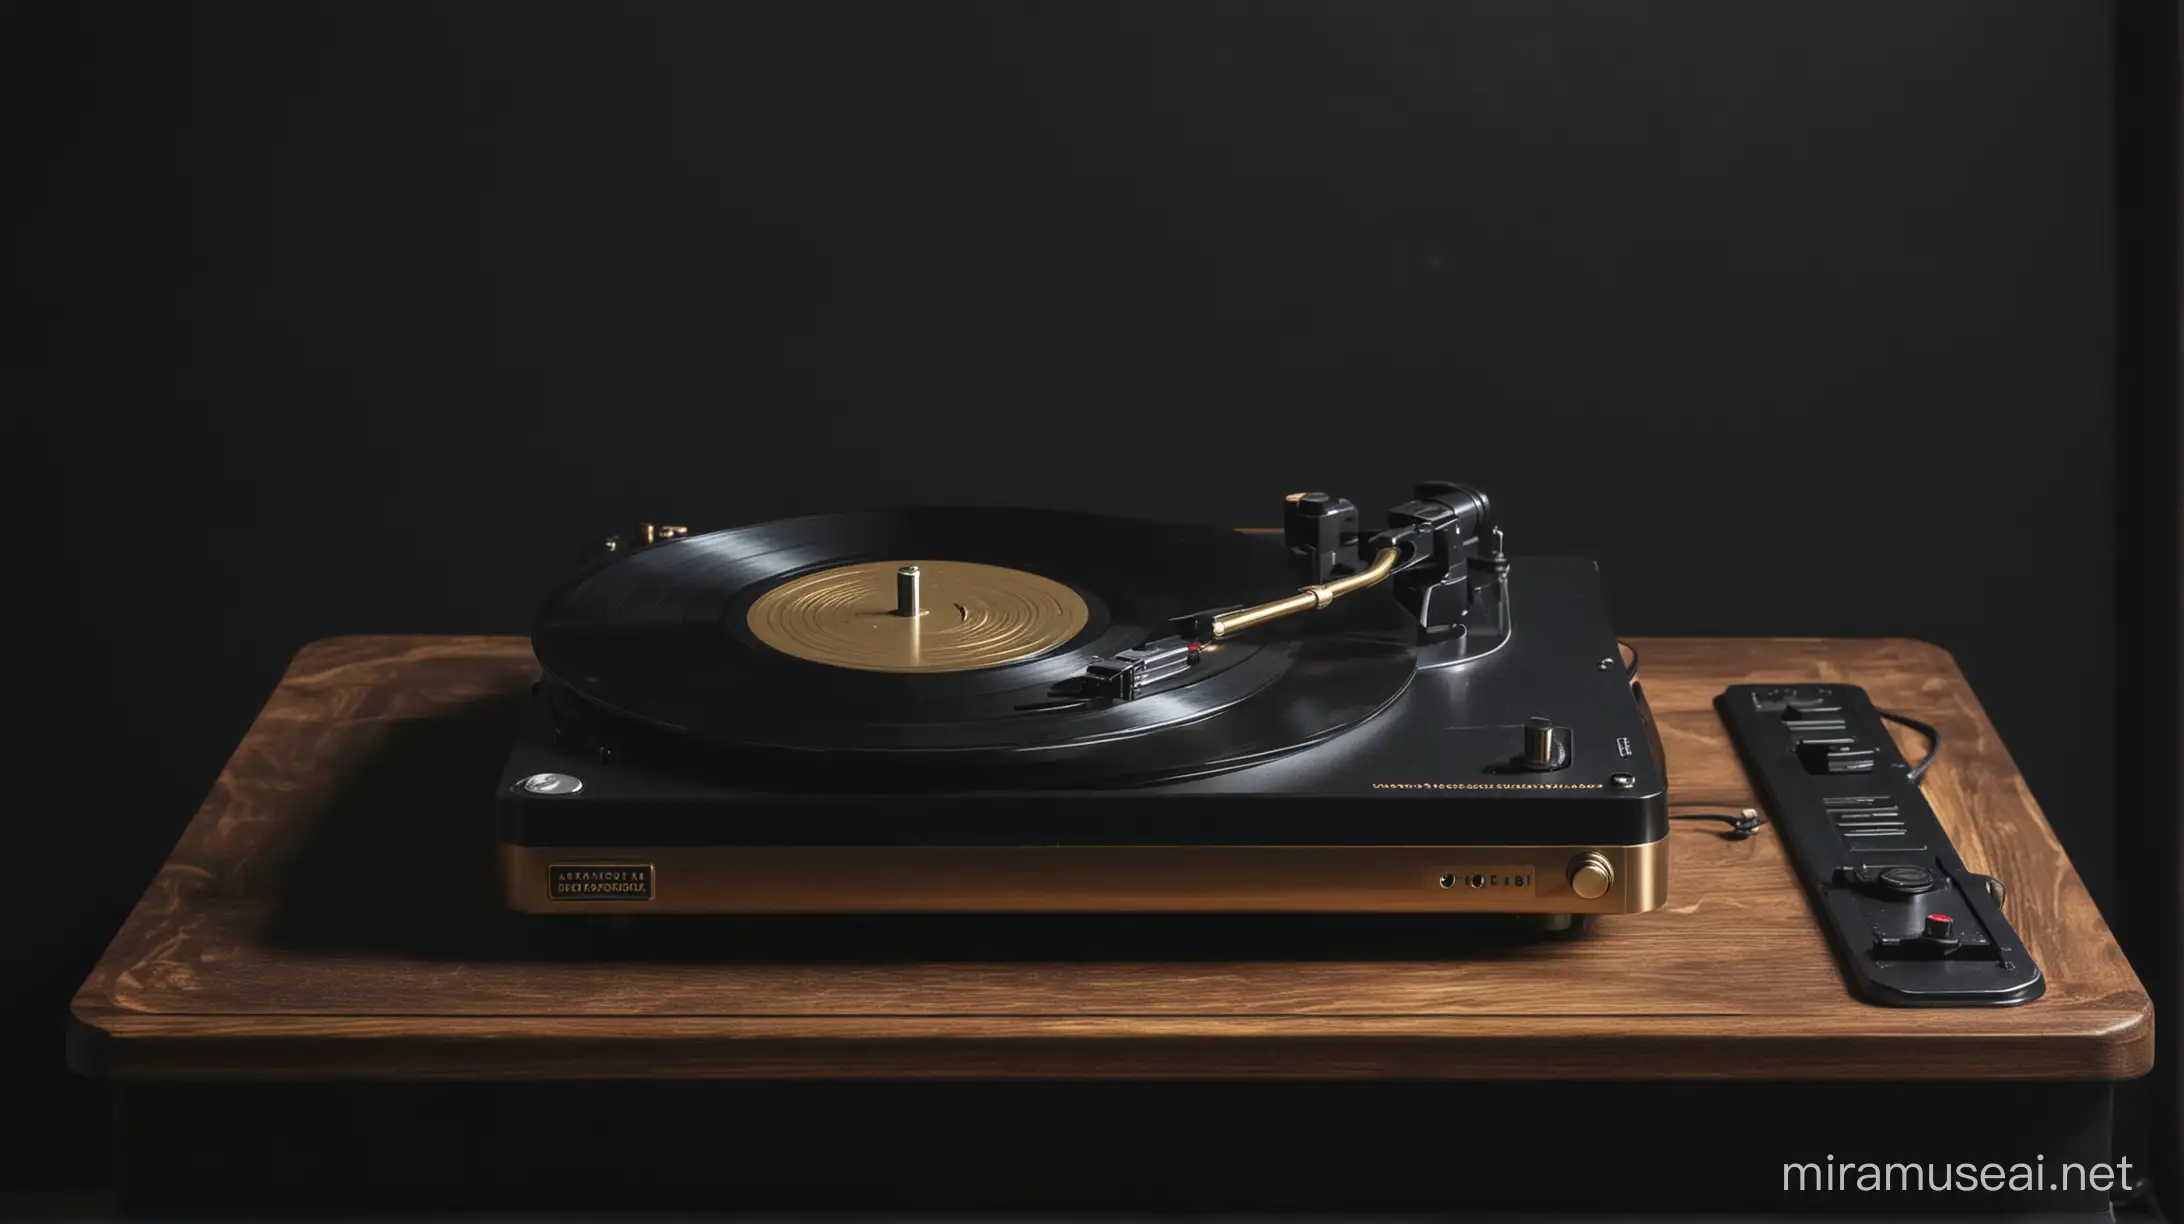 Vintage Black and Gold Record Player in Dimly Lit Room